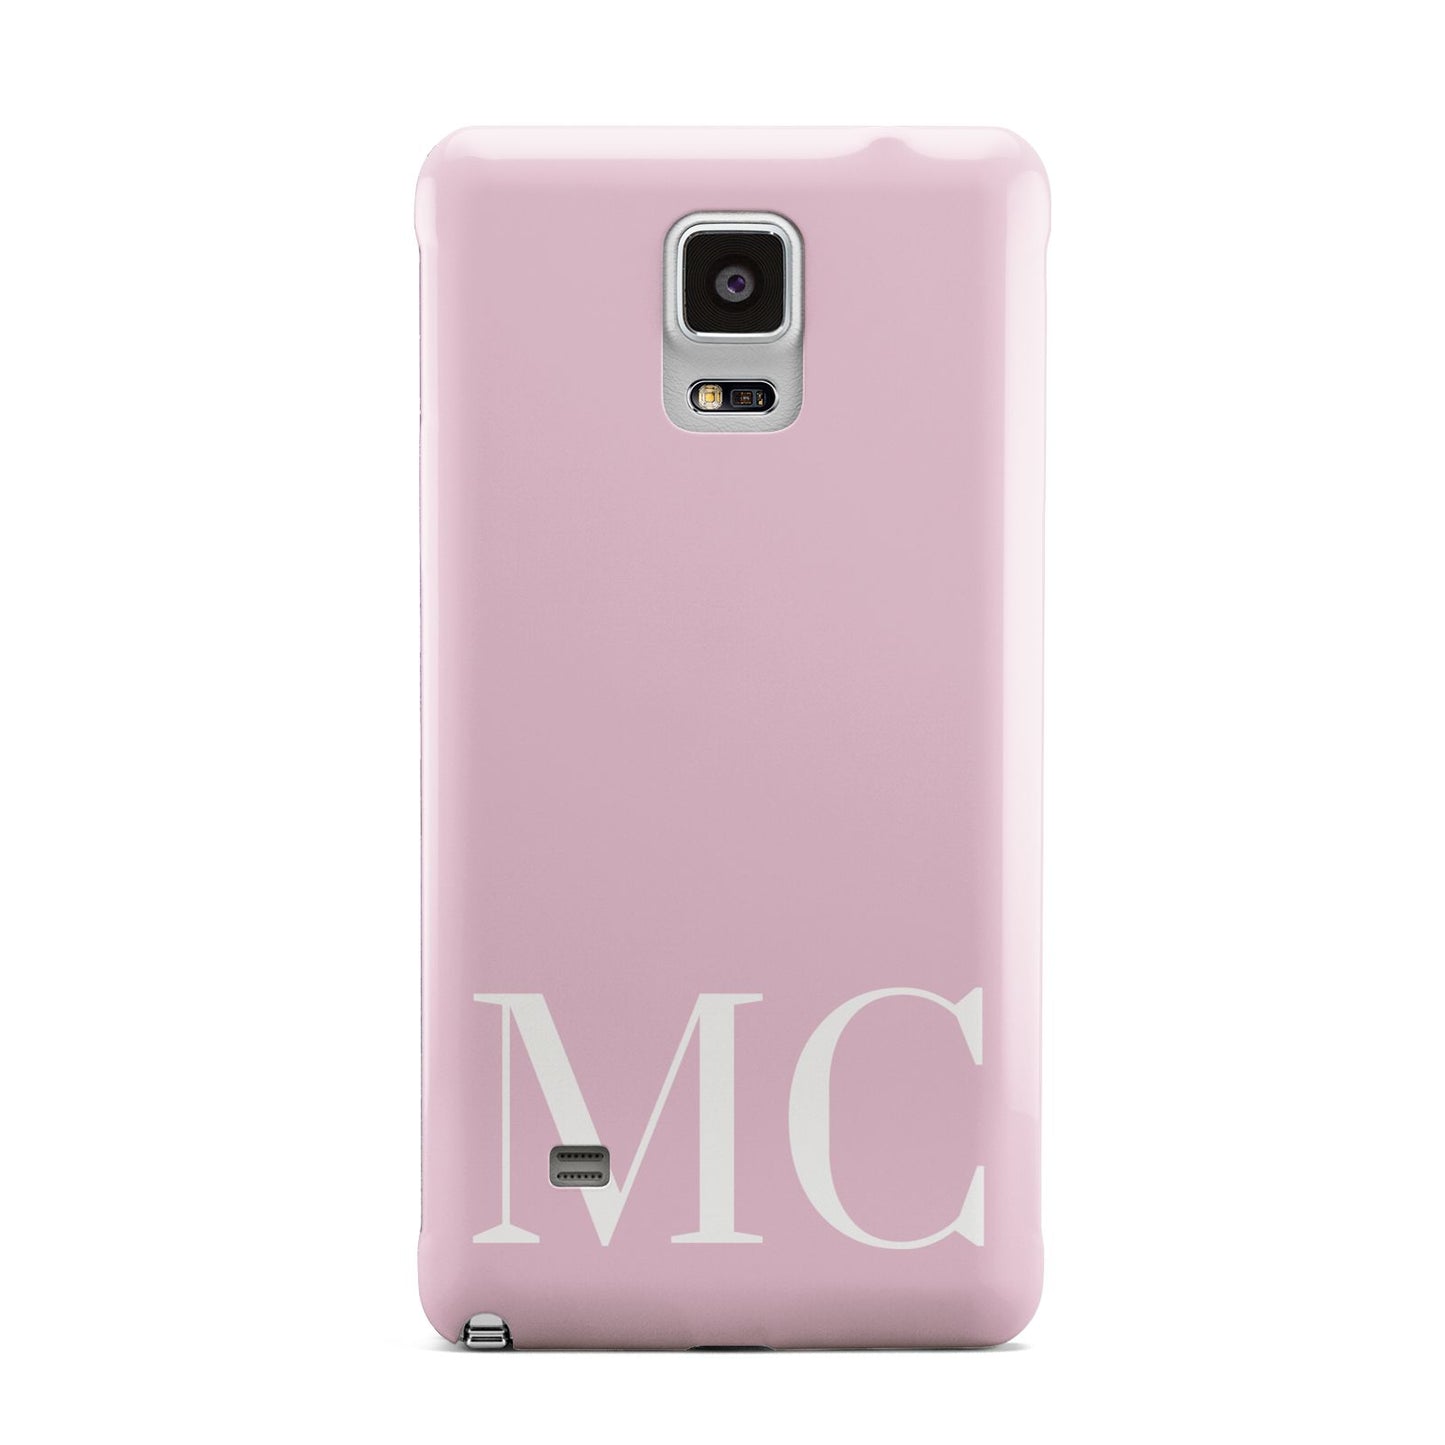 Initials Personalised 2 Samsung Galaxy Note 4 Case